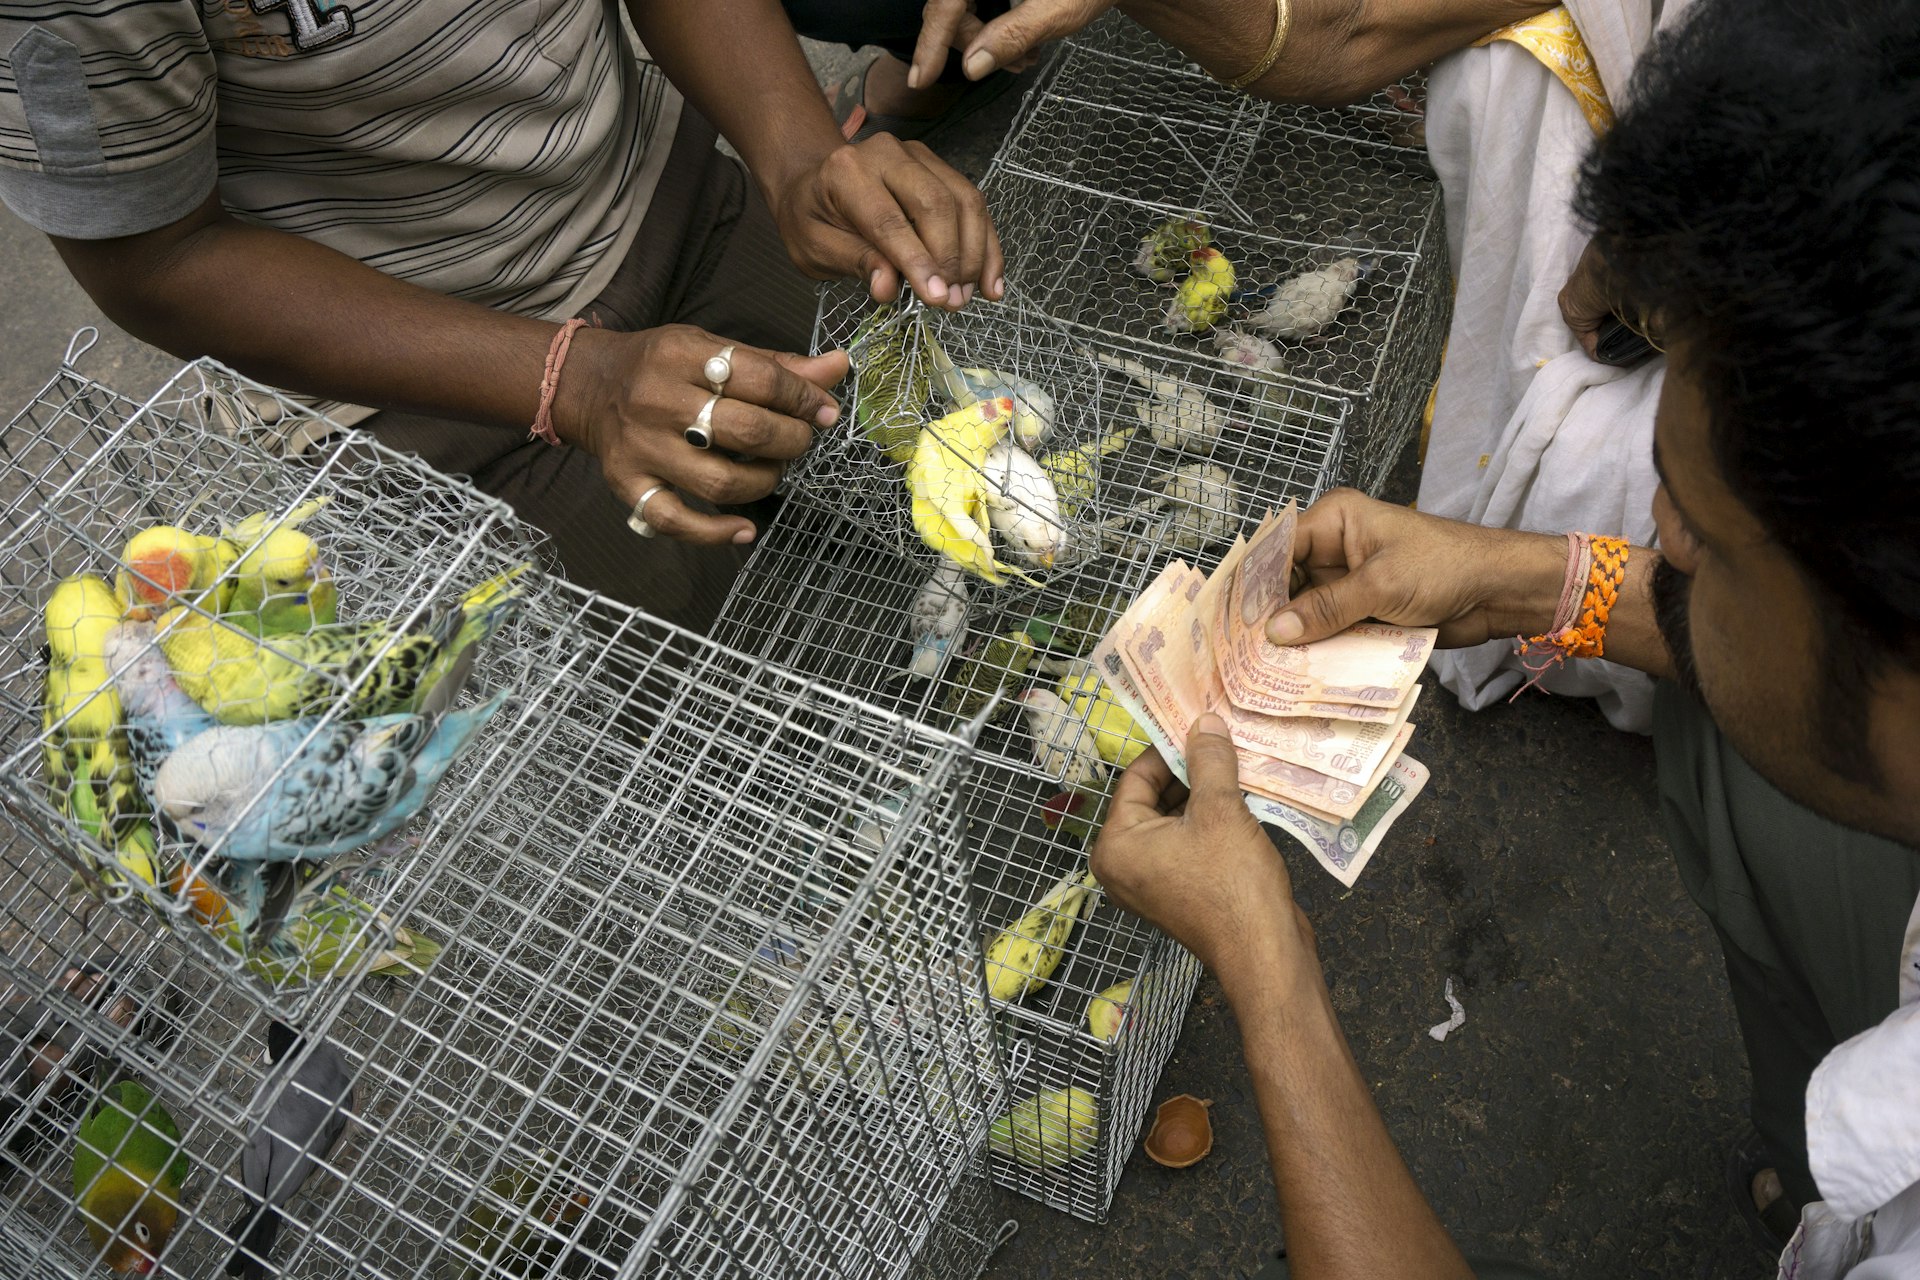 A buyer pays in cash for colorful birds at Kolkata pet market, Kolkata, West Bengal, India